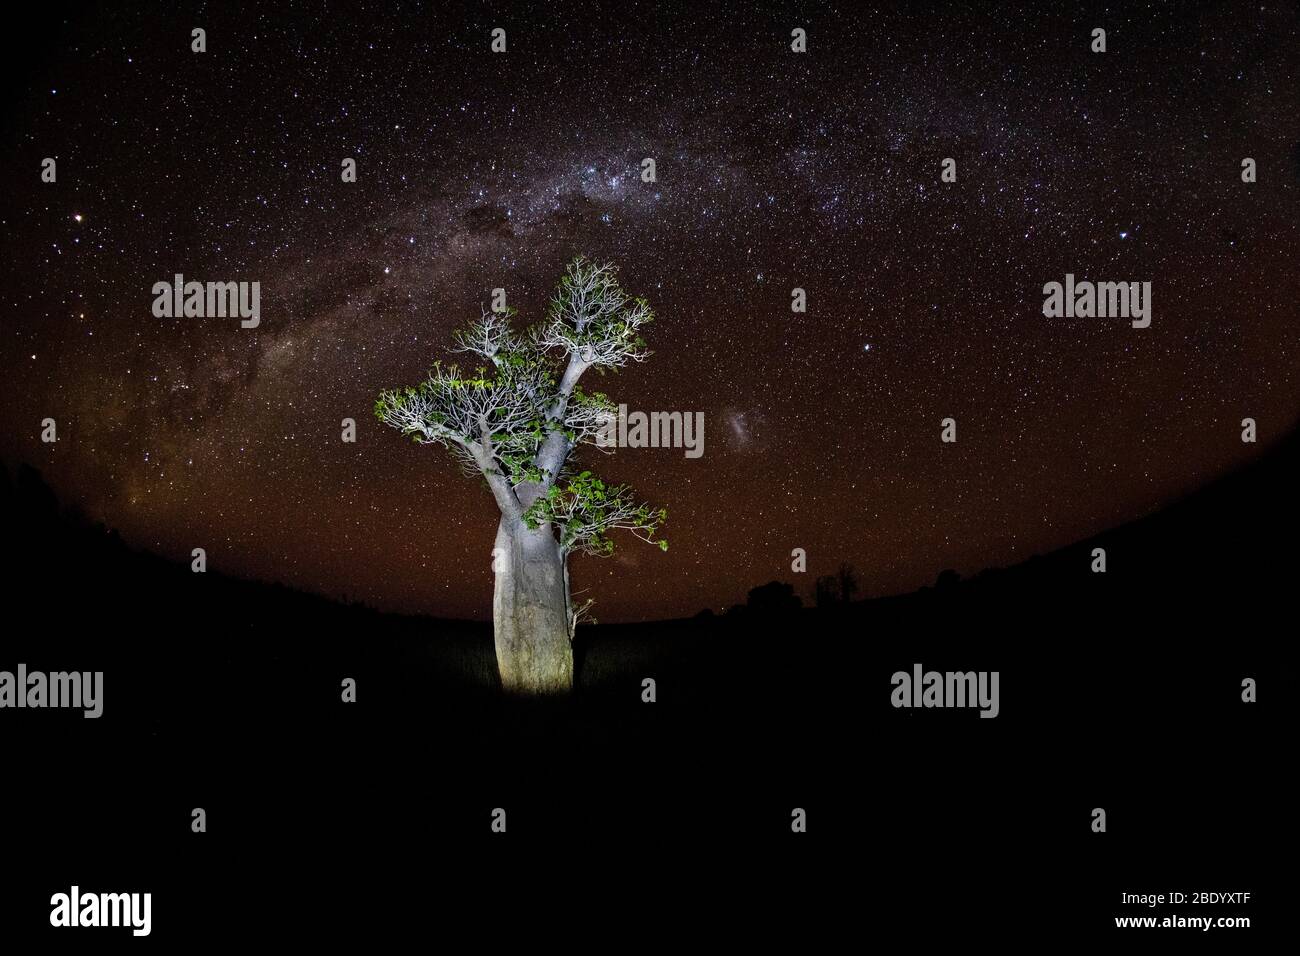 View of baobab tree at night under starry sky with milky way, Madagascar Stock Photo